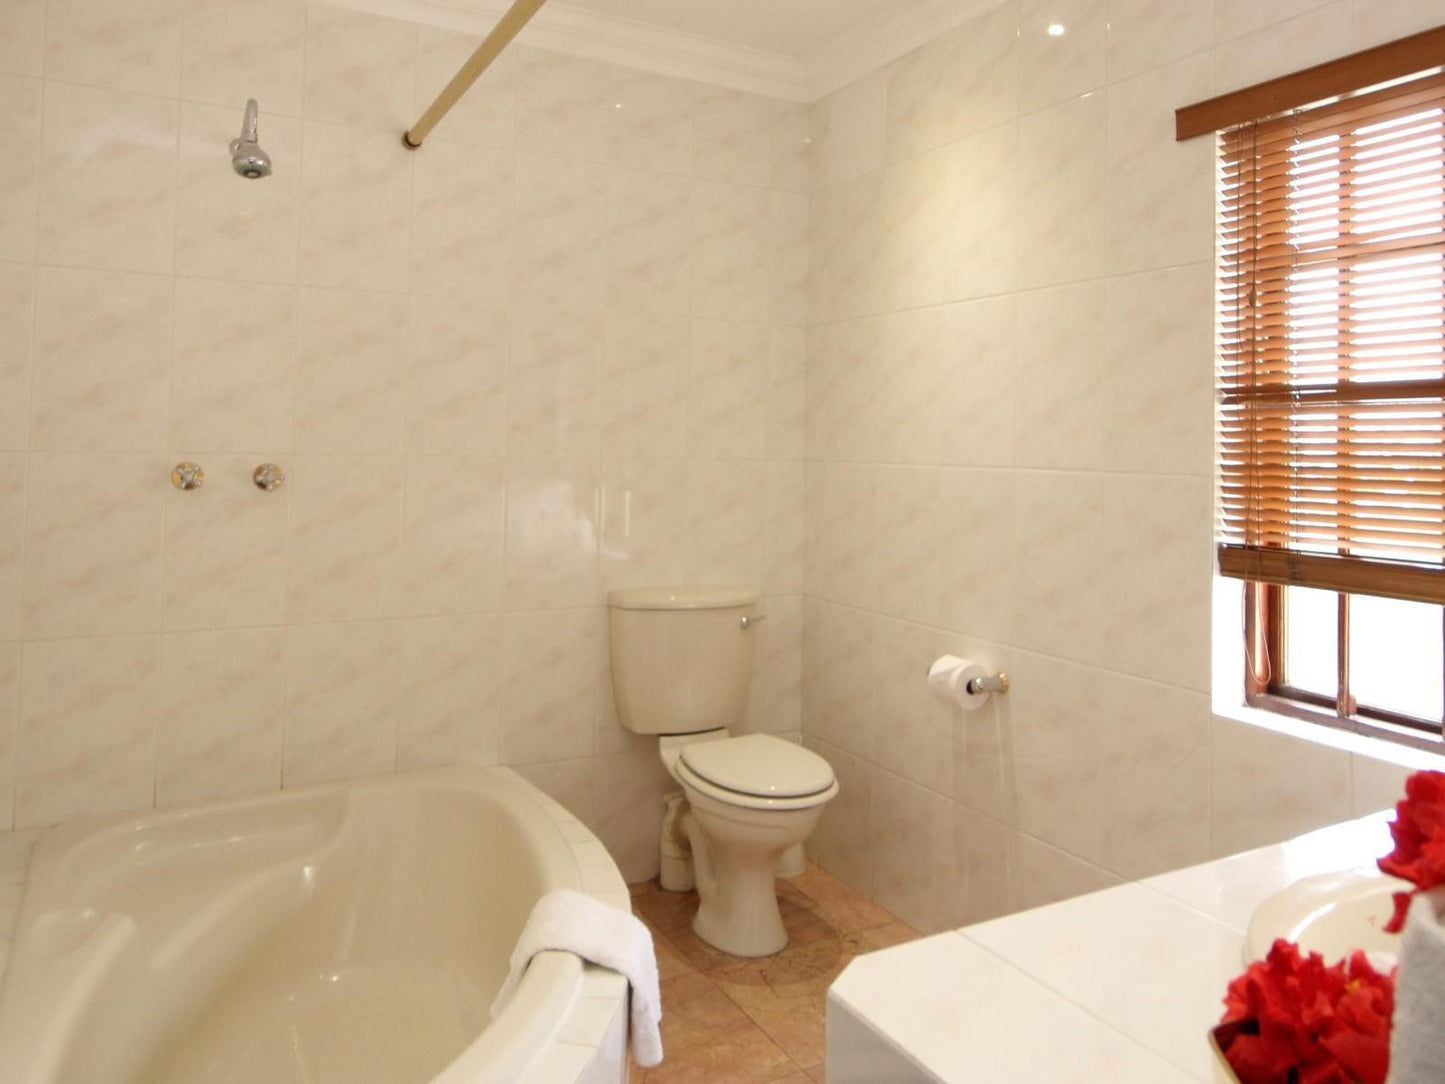 Annabel S Of Bryanston Boutique Guest House Country Life Park Johannesburg Gauteng South Africa Bathroom